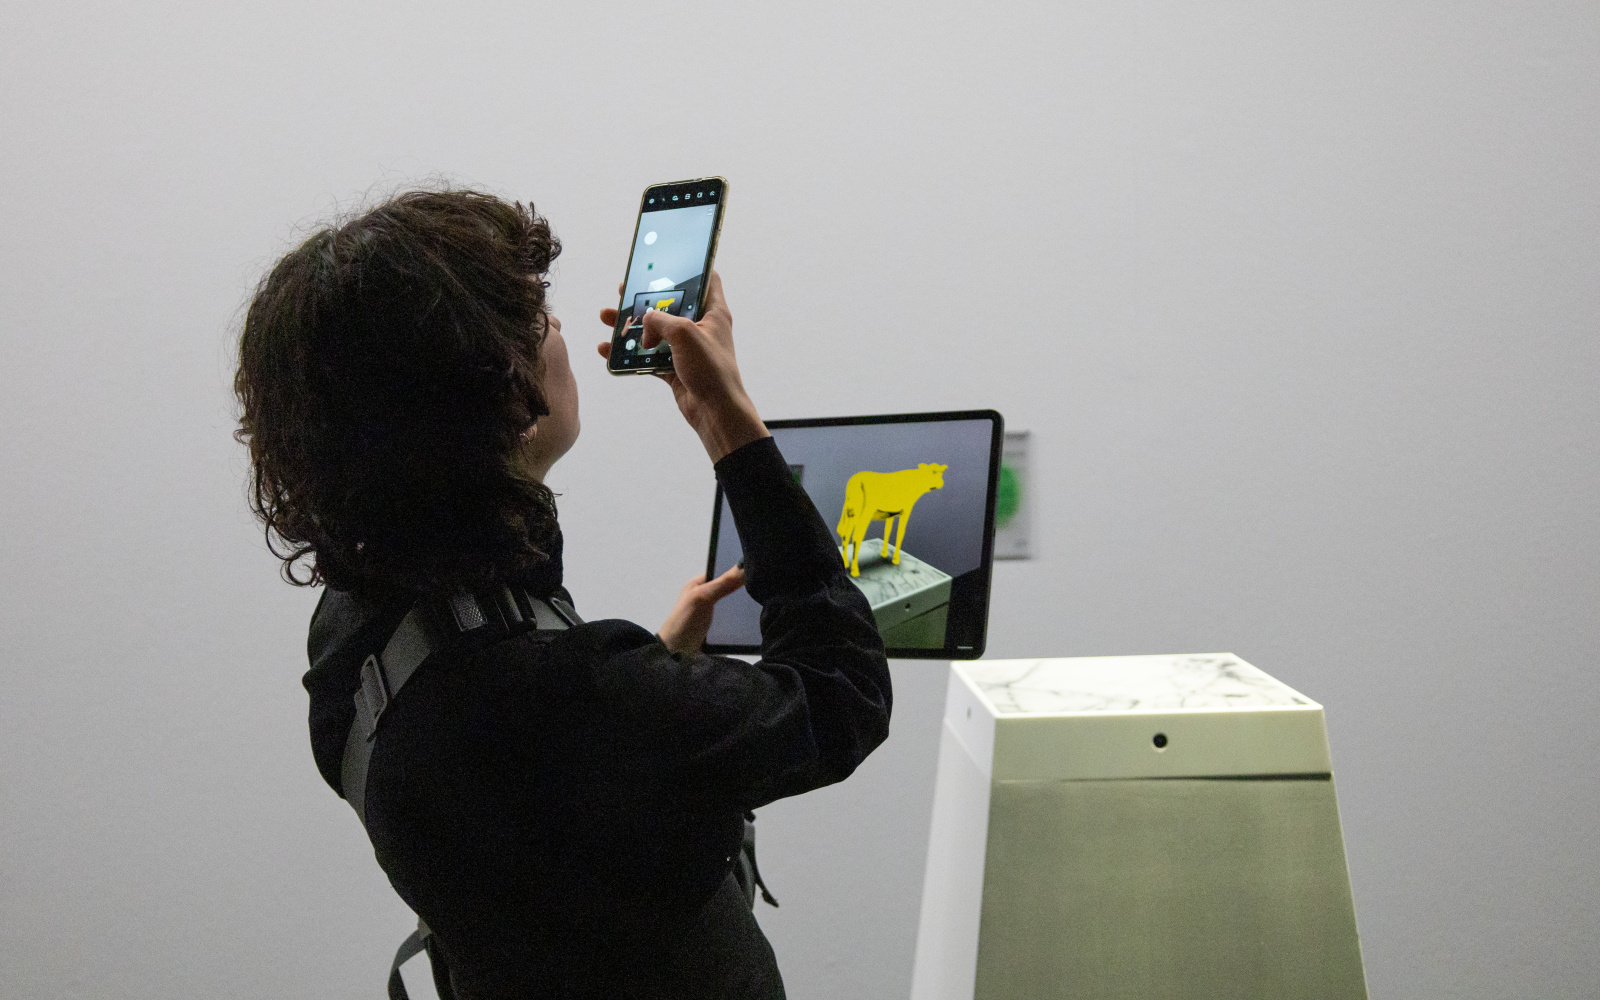 Exhibition view »Matter. Non-Matter. Anti-Matter« at ZKM | Center for Art and Media Karlsruhe, 2022. A person takes a picture of a tablet with his cell phone, on which a yellow cow can be seen.